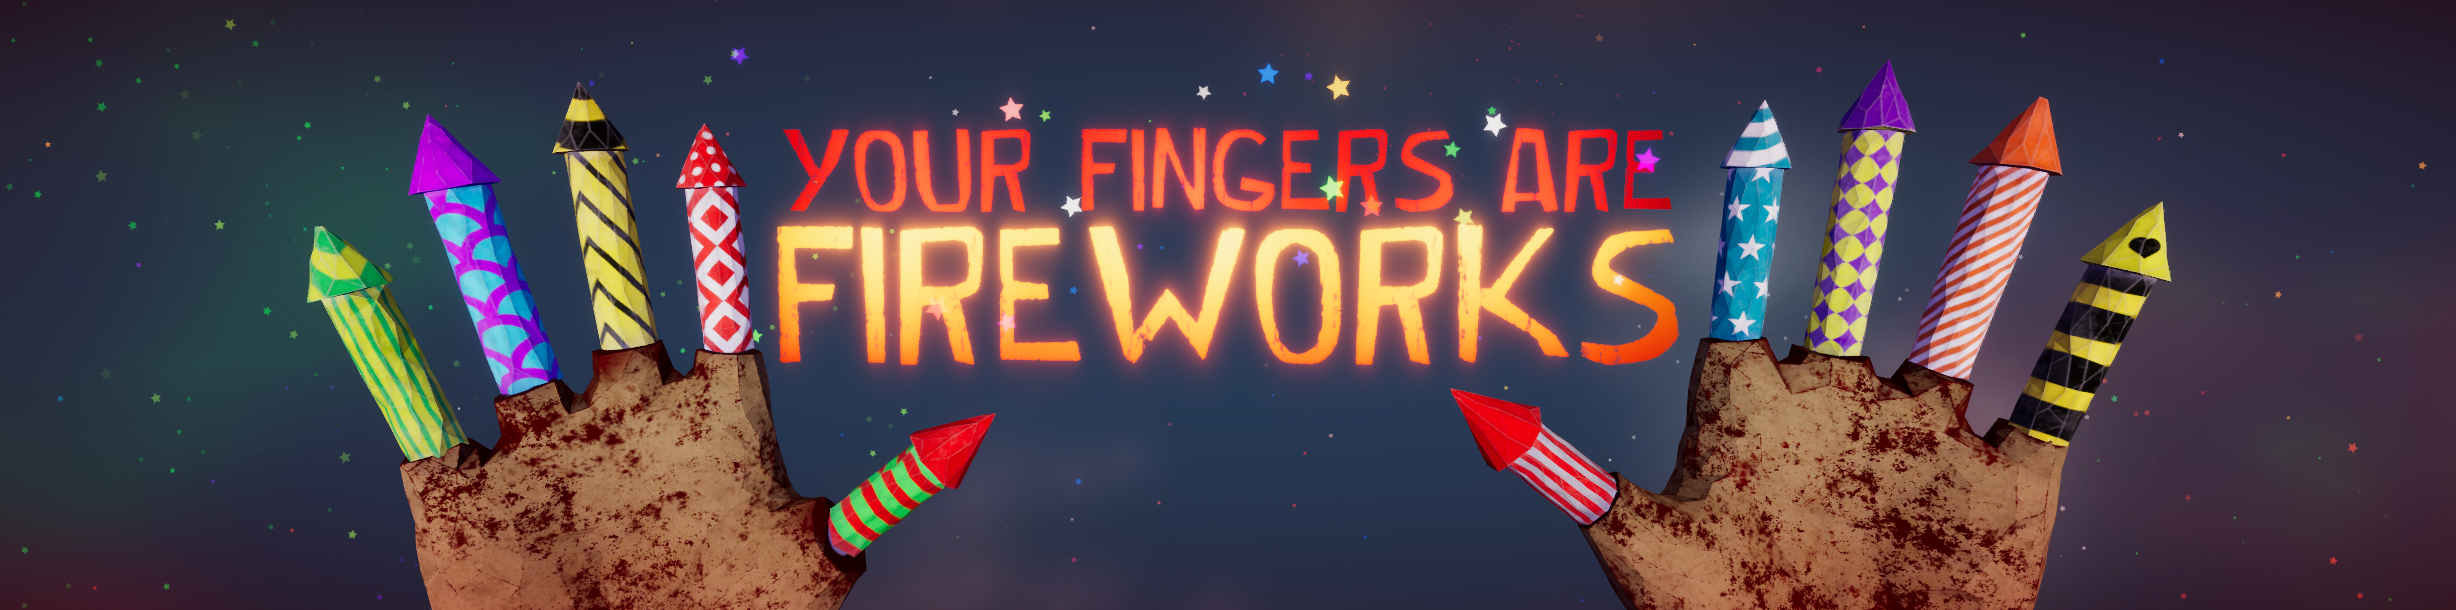 Your Fingers Are Fireworks (Oculus Quest)